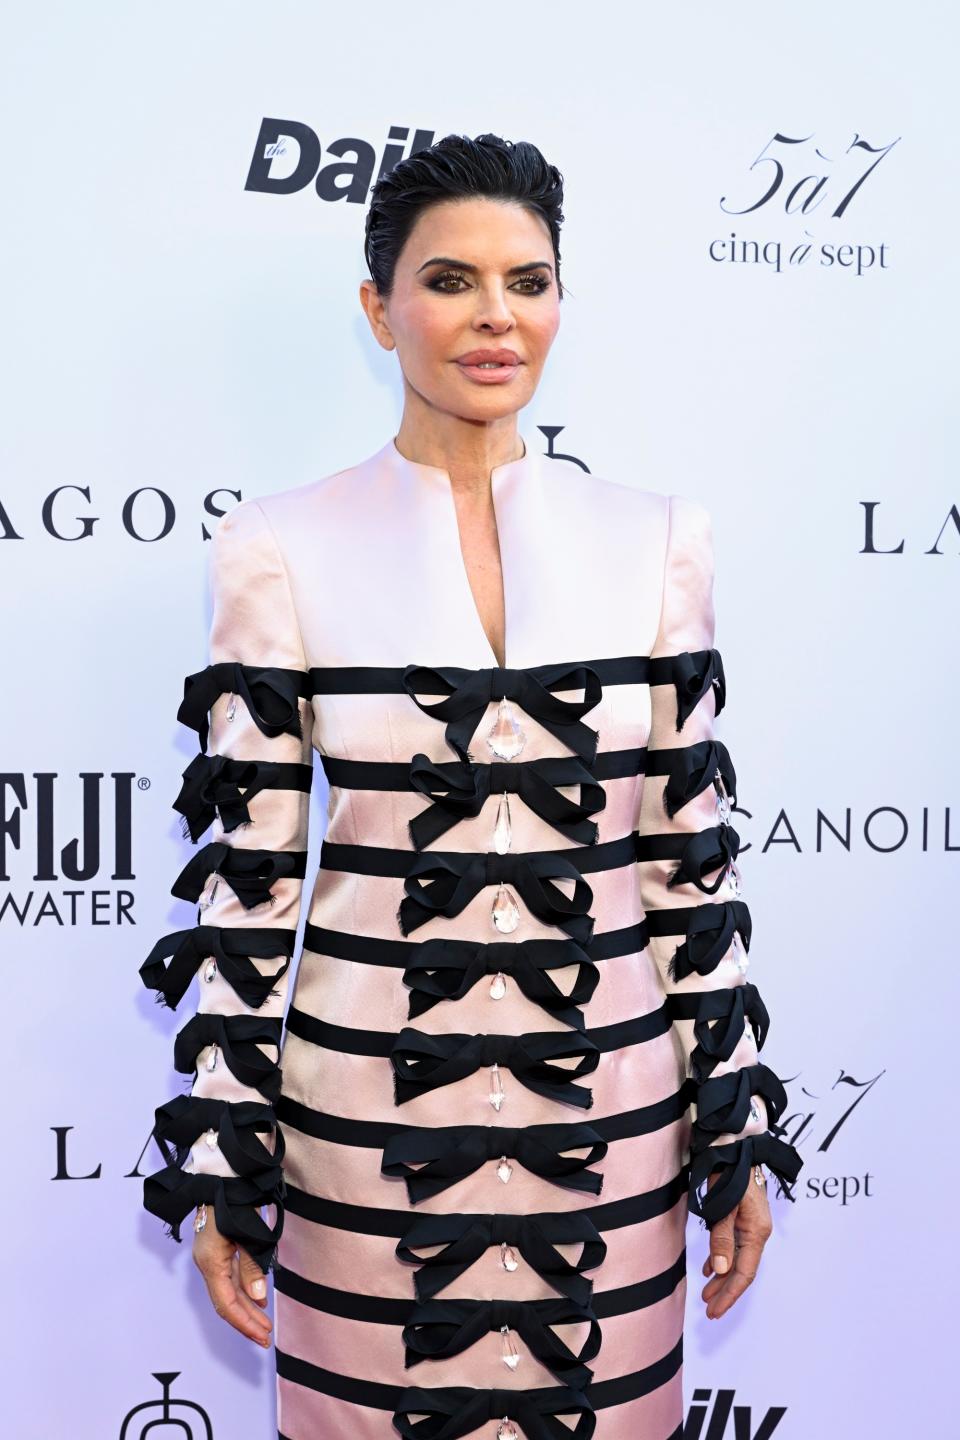 Lisa Rinna attends the 8th Annual Fashion Los Angeles Awards held at The Beverly Hills Hotel on April 28.